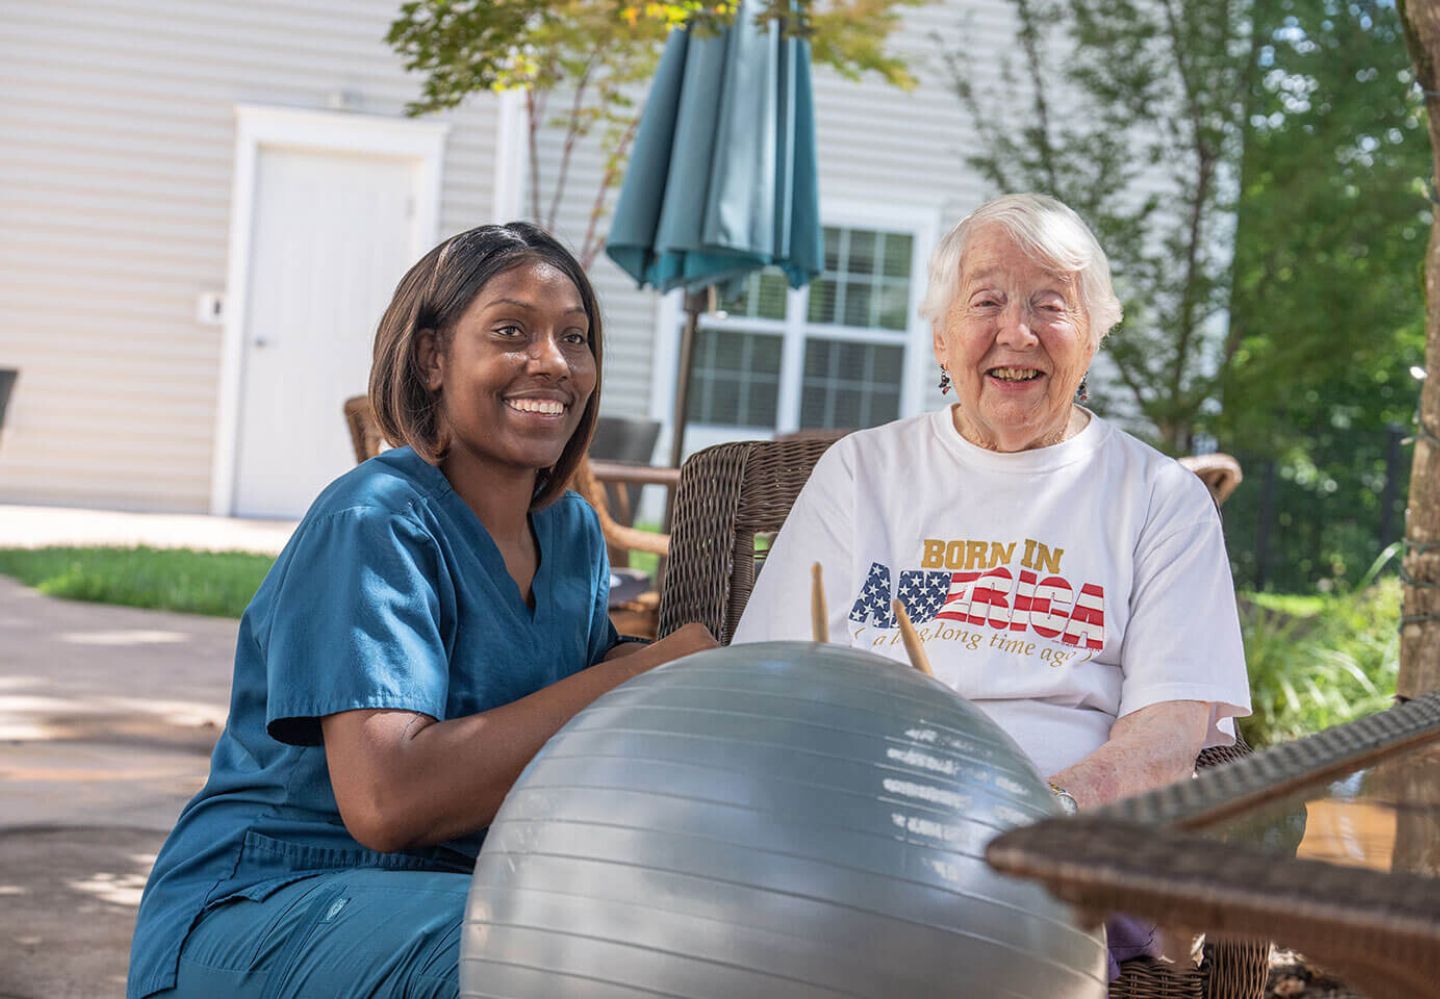 A hospice patient enjoys playing the drums on an exercise ball while her hospice aide smiles at her.